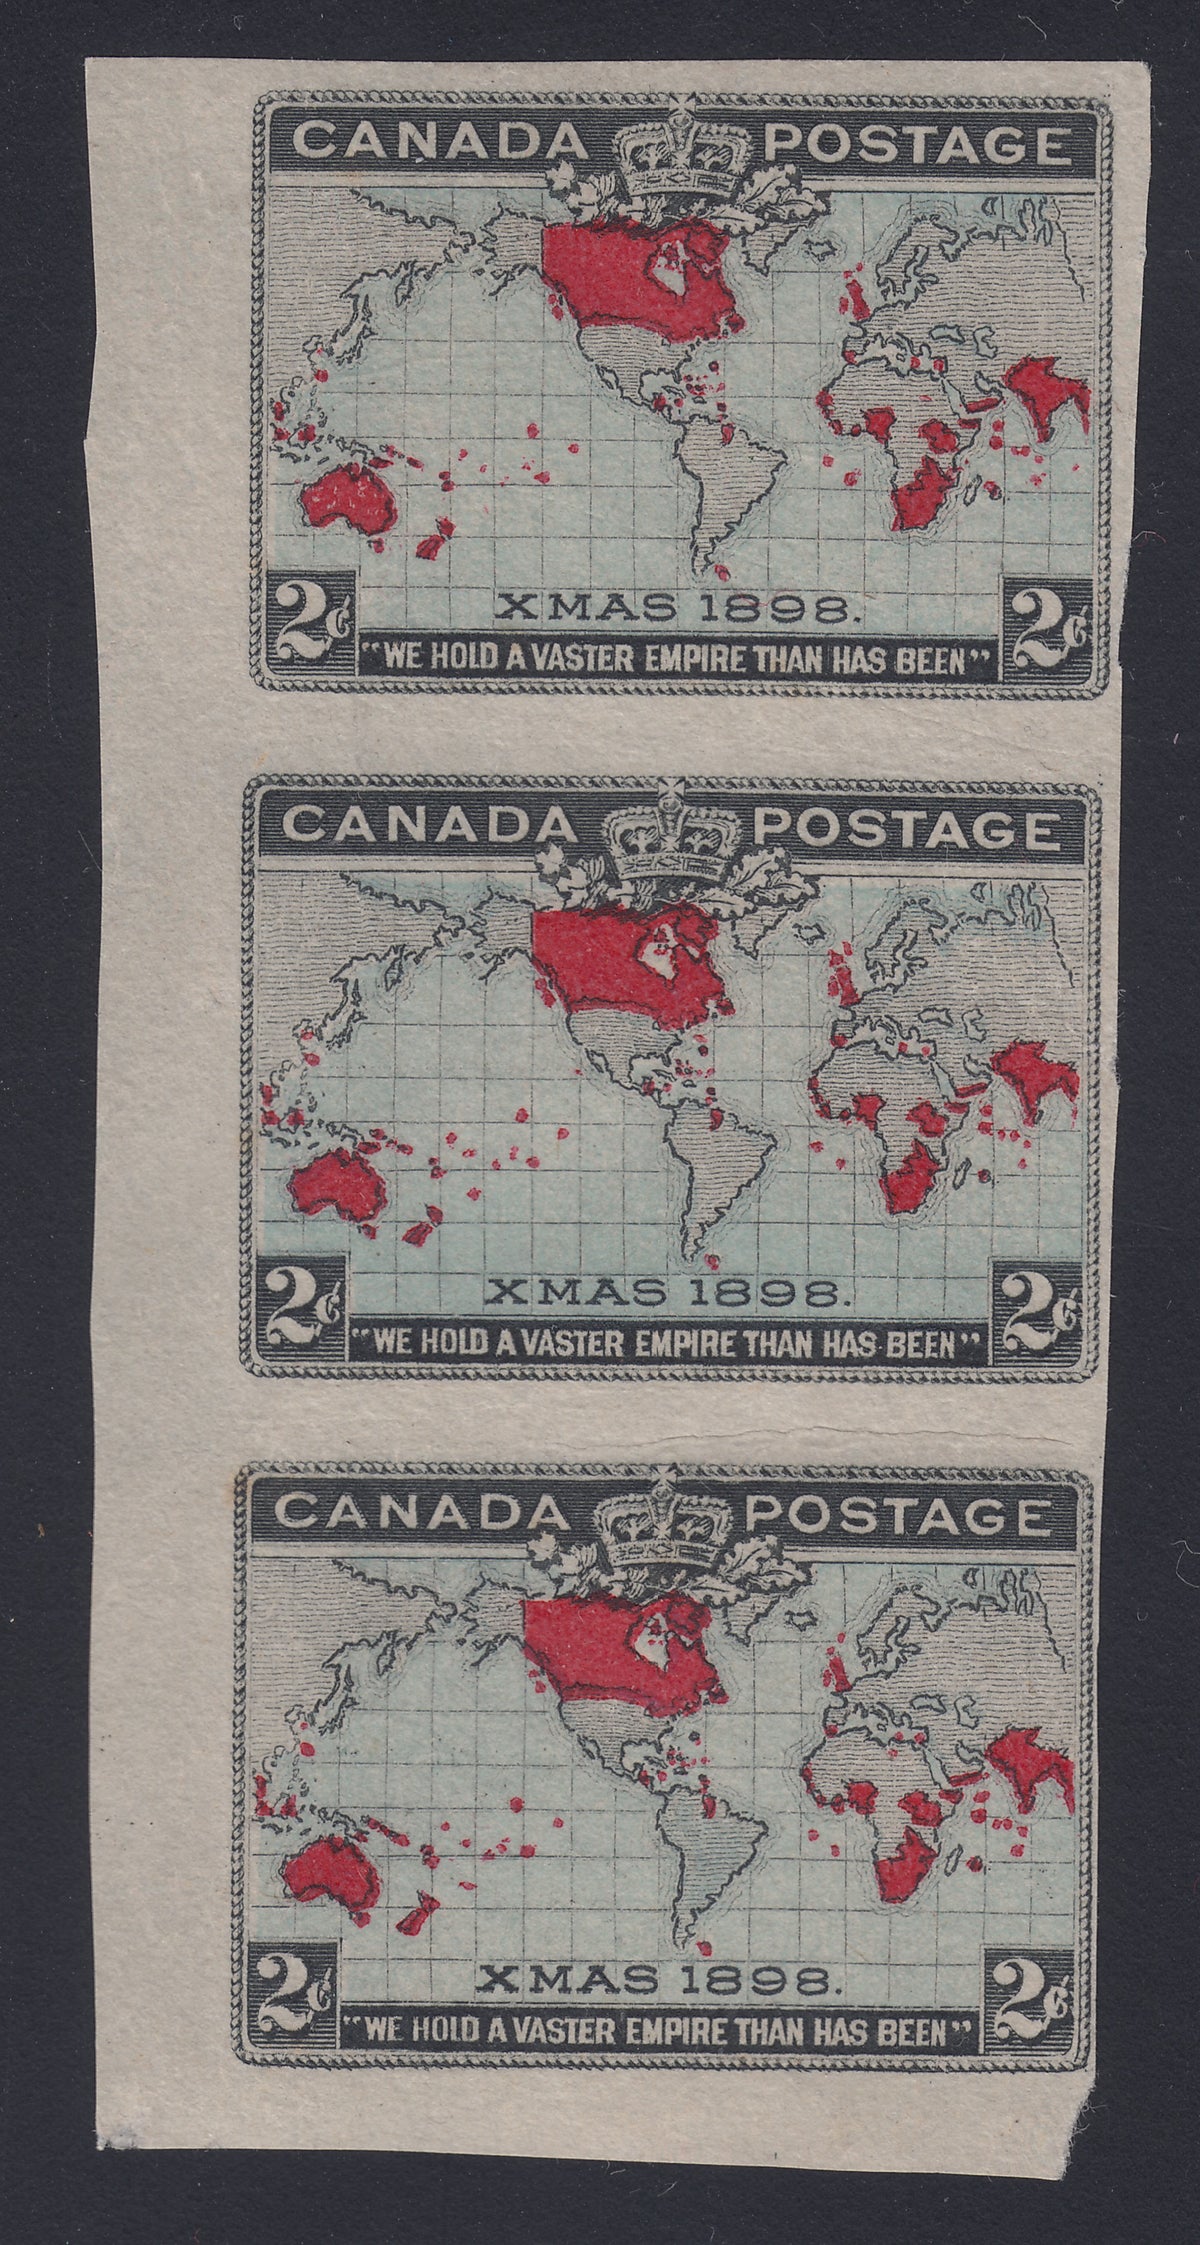 0086CA1808 - Canada #86a, iii - Mint, Imperforate Vertical Strip of 3 &amp; Major Re-Entry